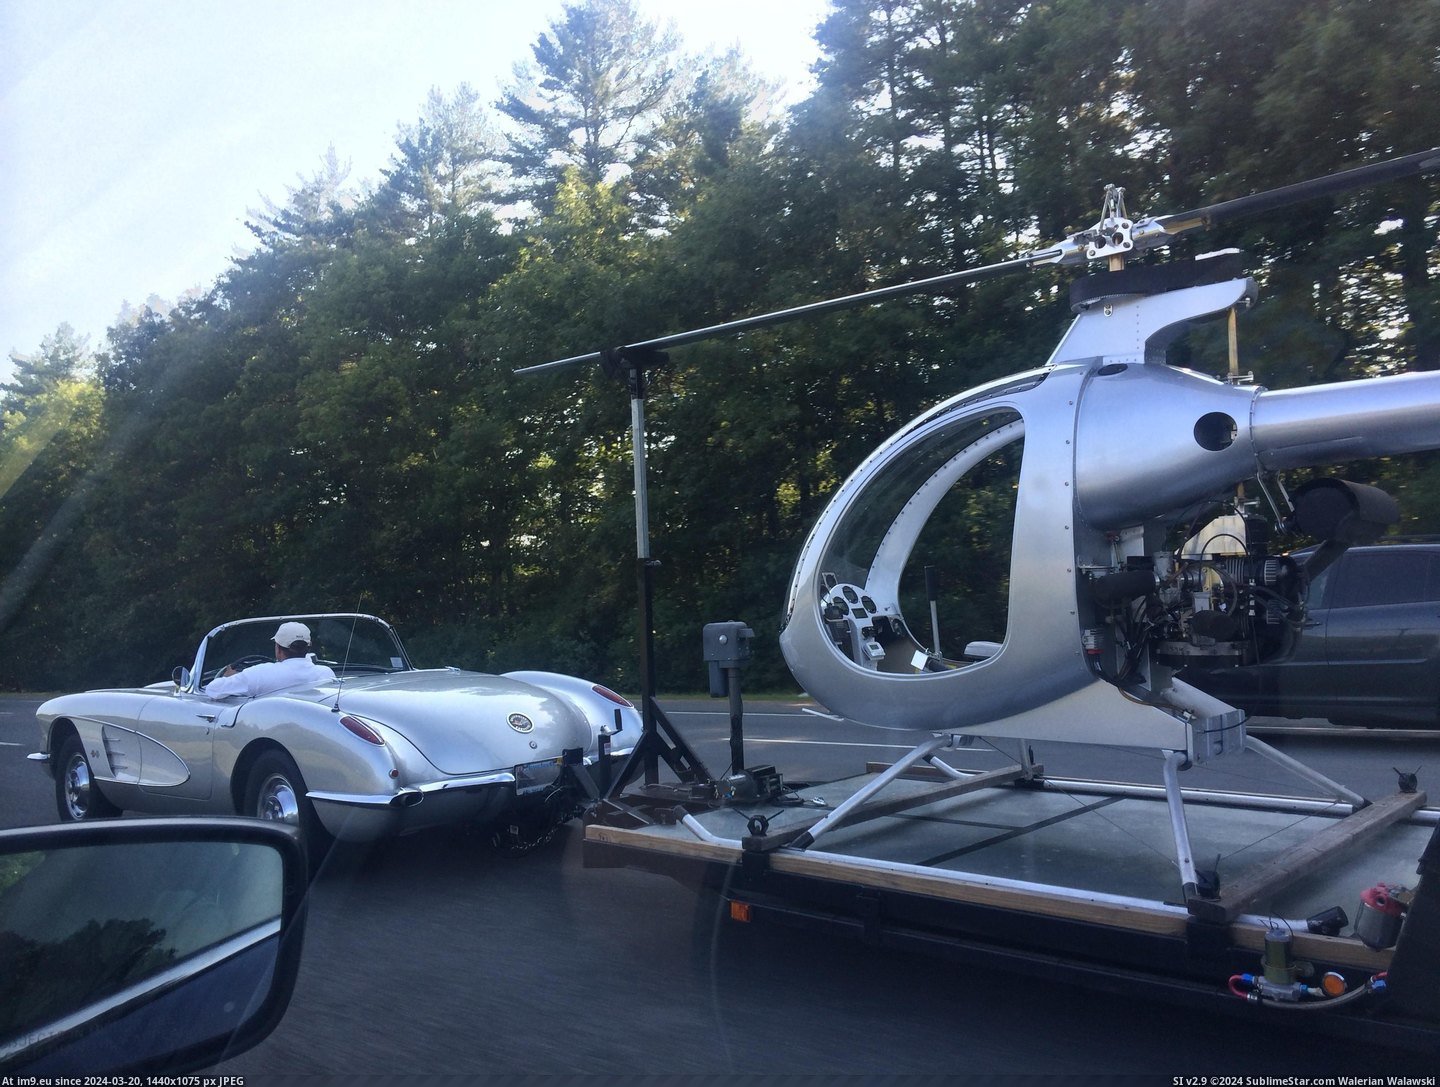 #Guy #Life #Towing #Corvette #Helicopter #Winning [Pics] 50's corvette towing a helicopter. this guy is winning at life. Pic. (Bild von album My r/PICS favs))